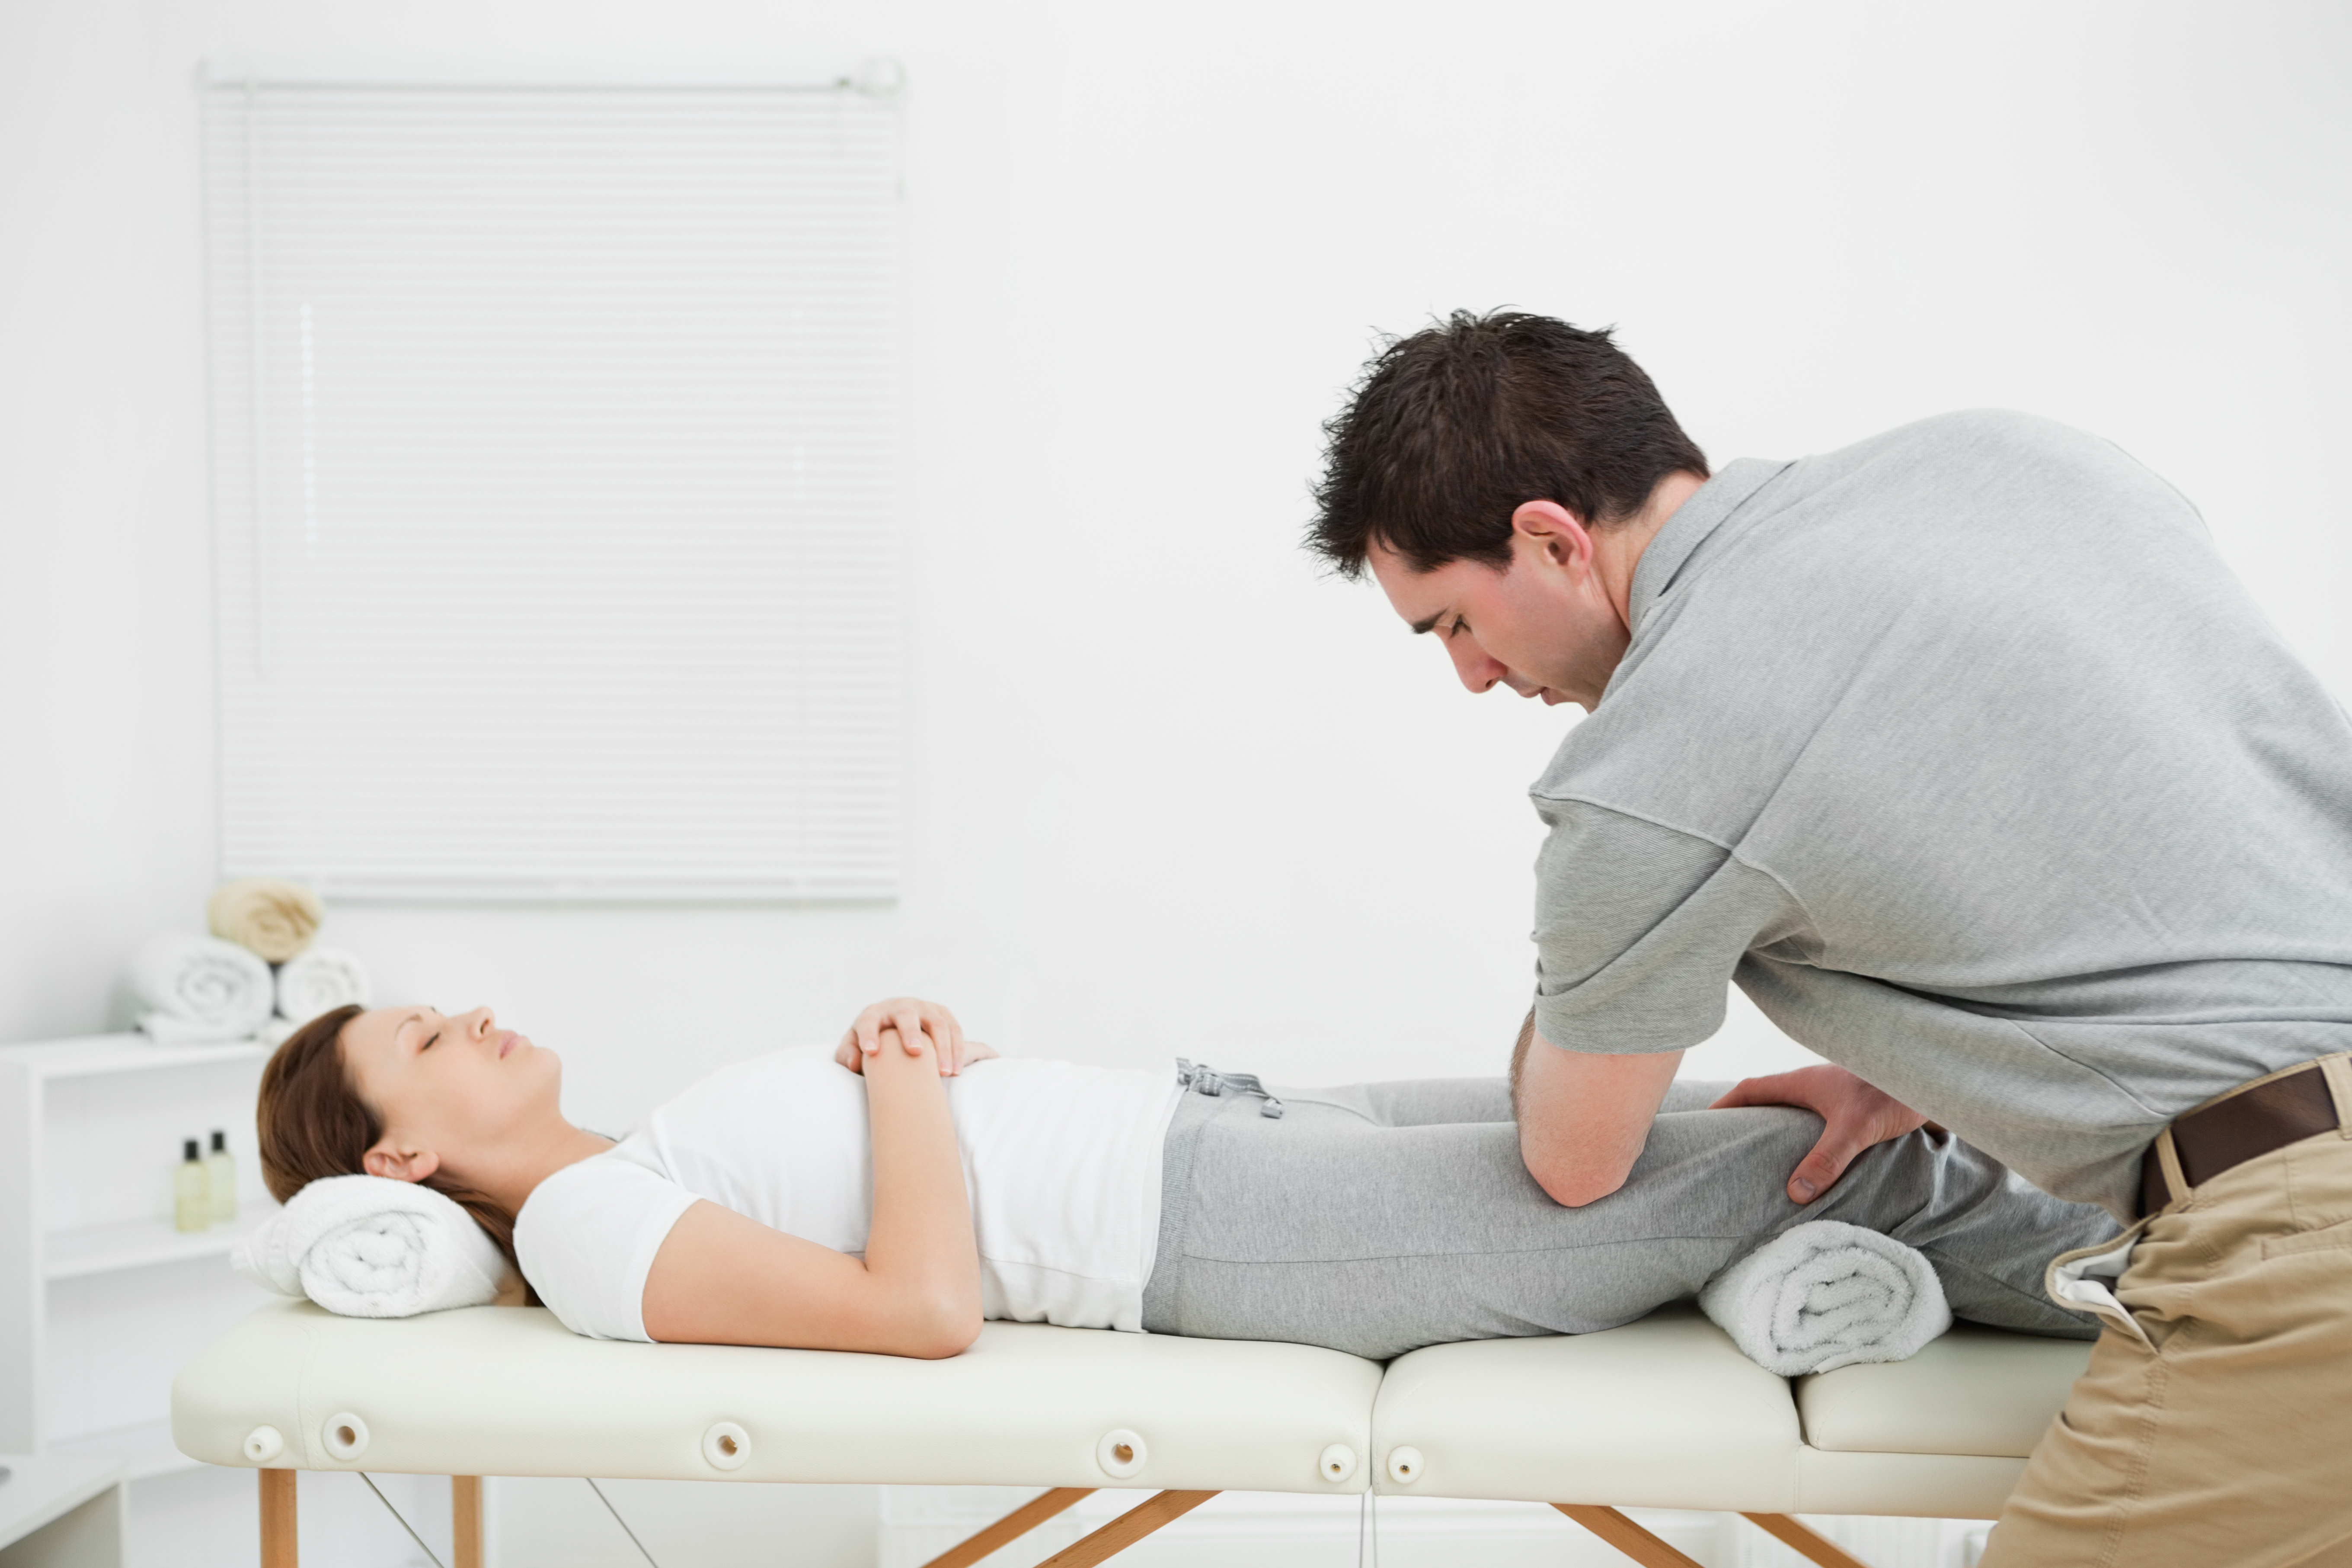 Woman lying on her back while being massaged by a man in a room